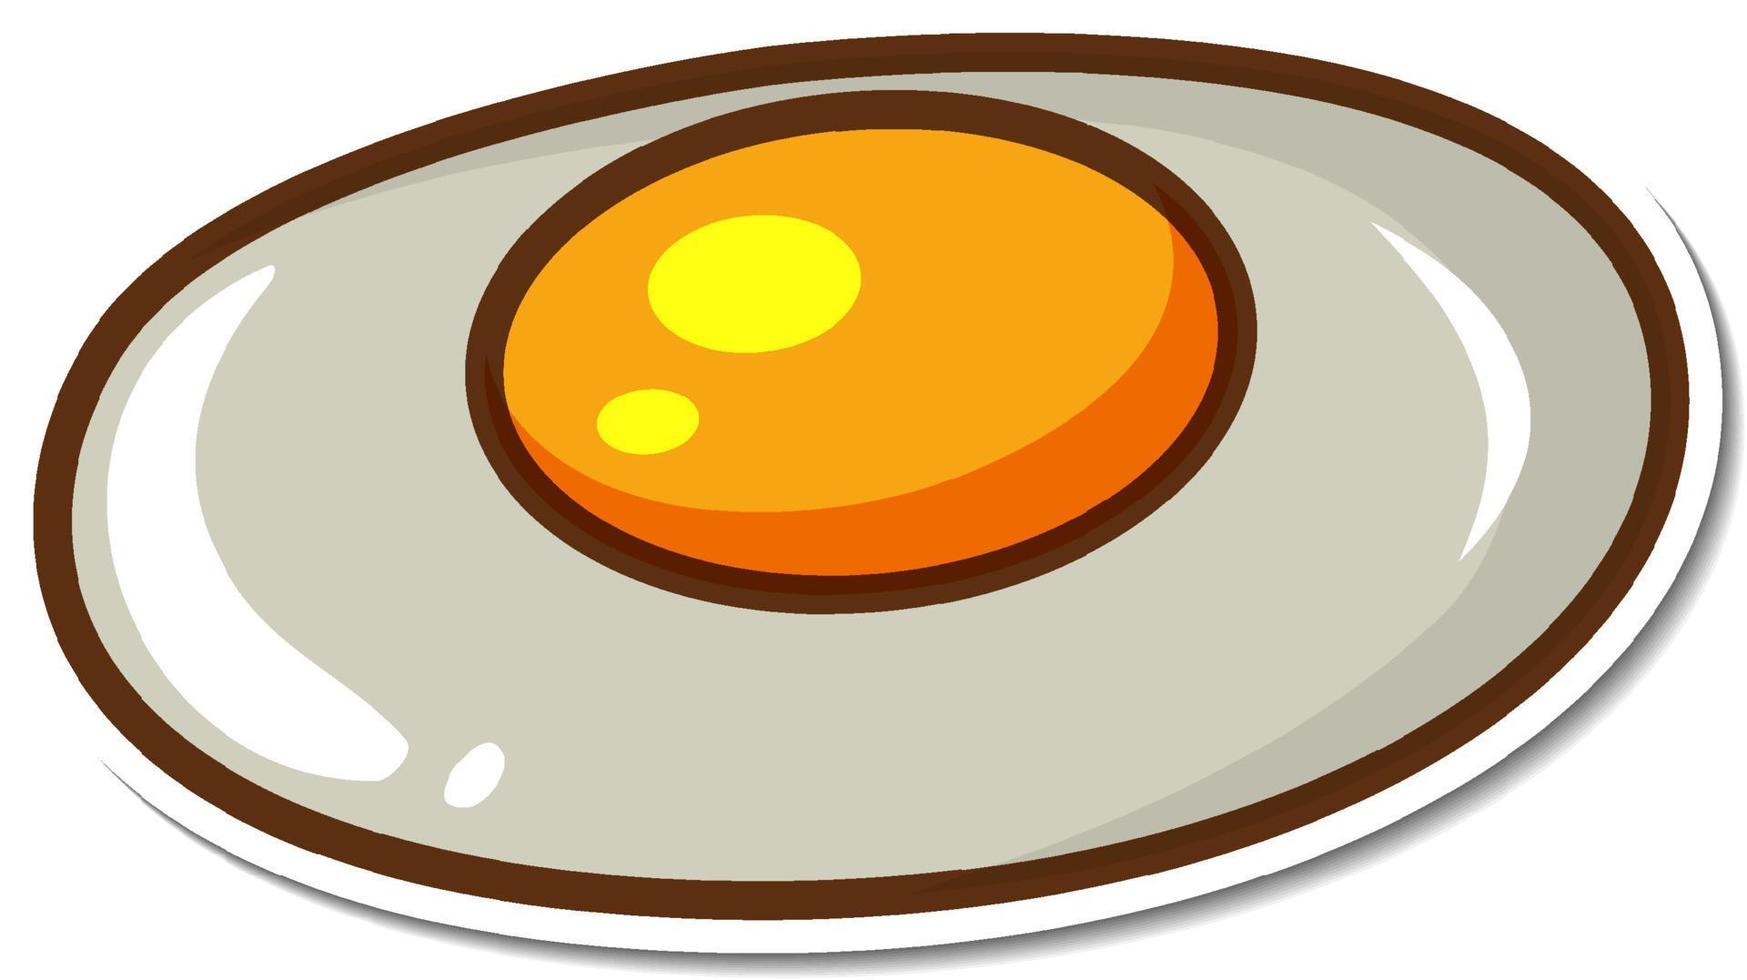 Fried egg in sticker template vector